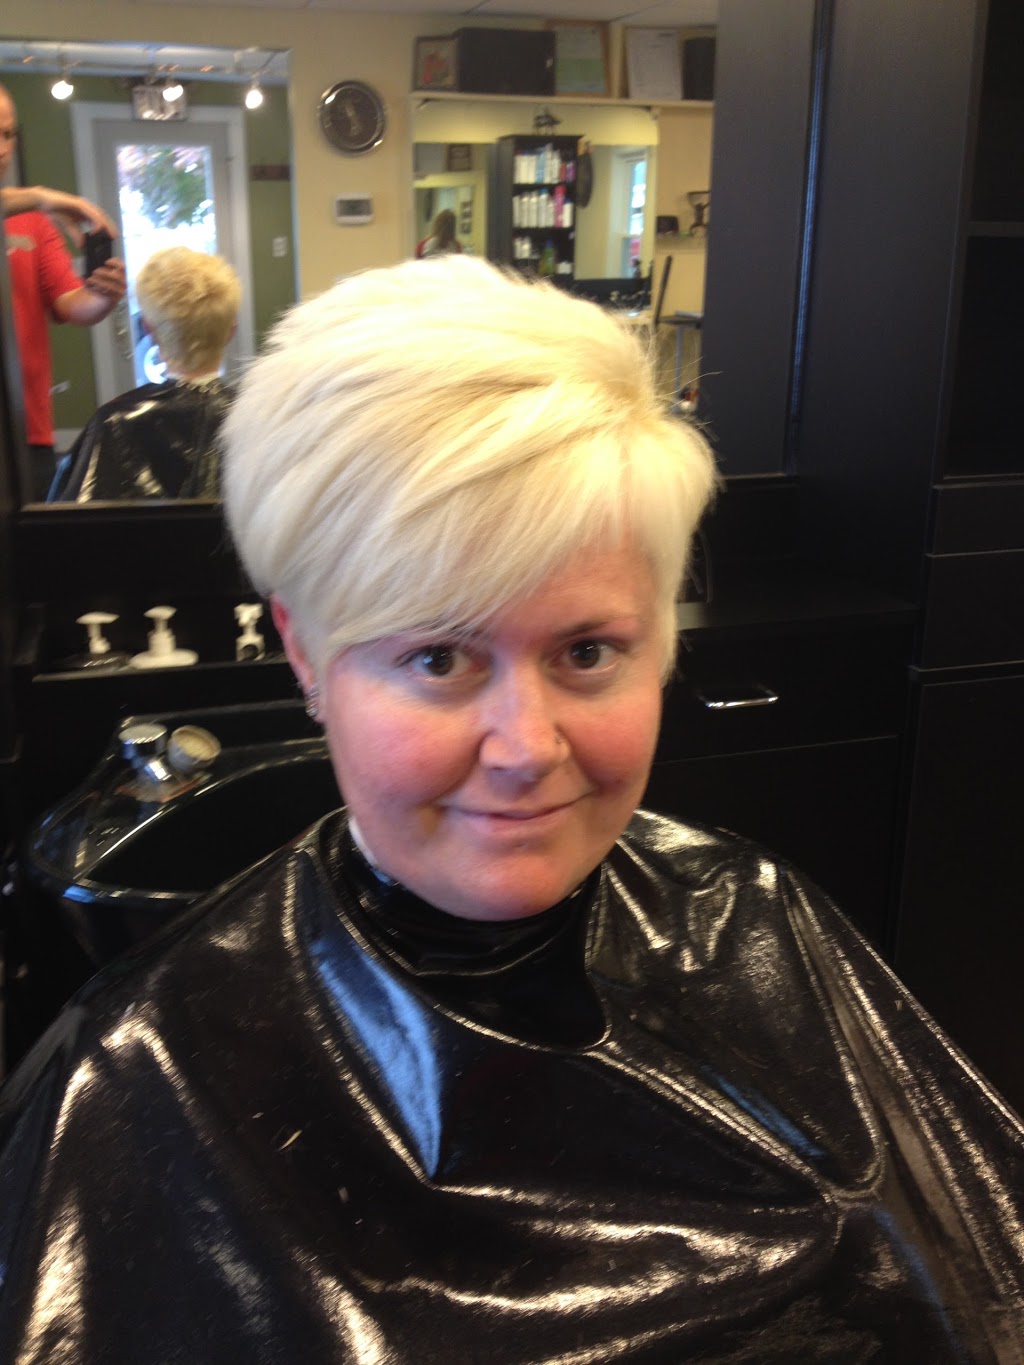 Cutting Edge Family Hairstyling | 430 Long St, Ashville, OH 43103, USA | Phone: (740) 983-4411